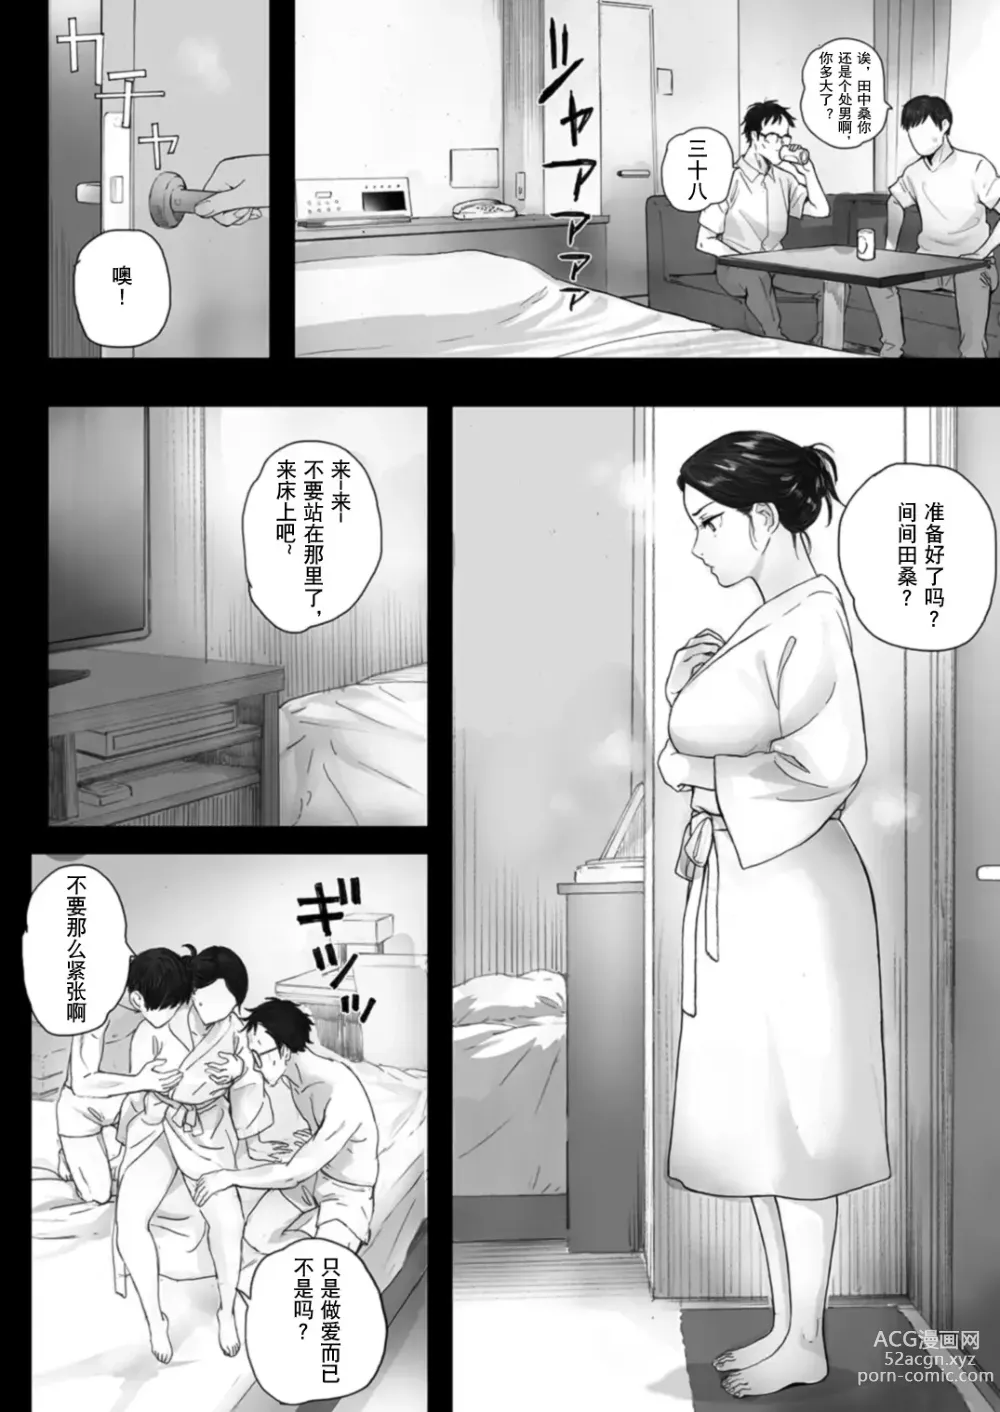 Page 27 of doujinshi 706 rooms